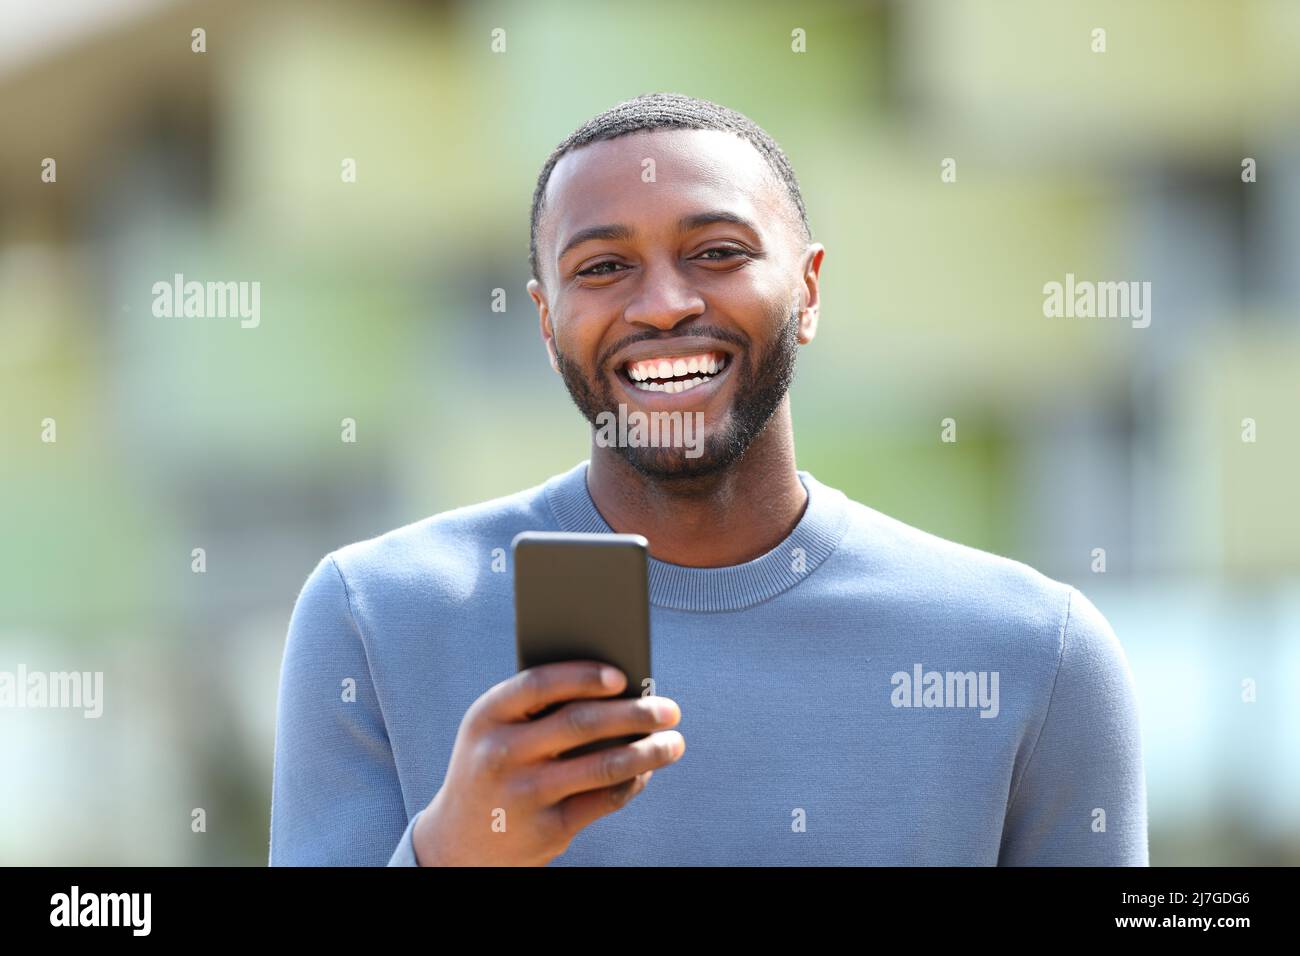 Front view portrait of a happy man with black skin laughing holding phone looking at you in the street Stock Photo